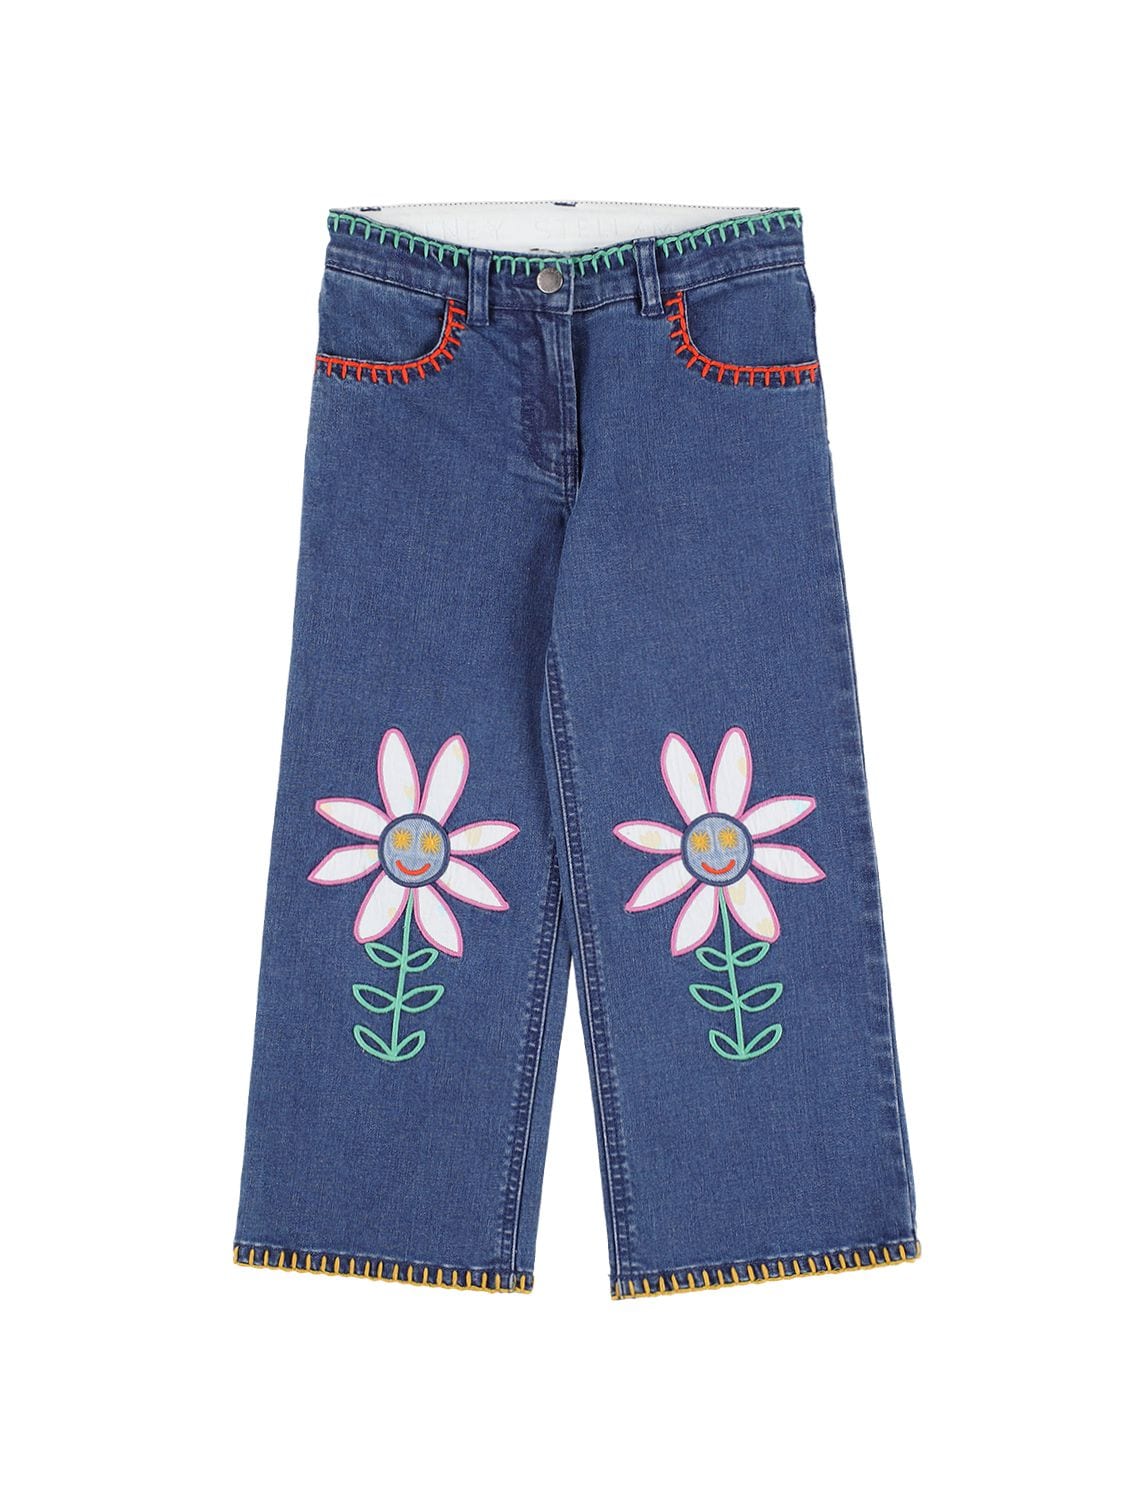 Image of Embroidered Organic Cotton Denim Jeans